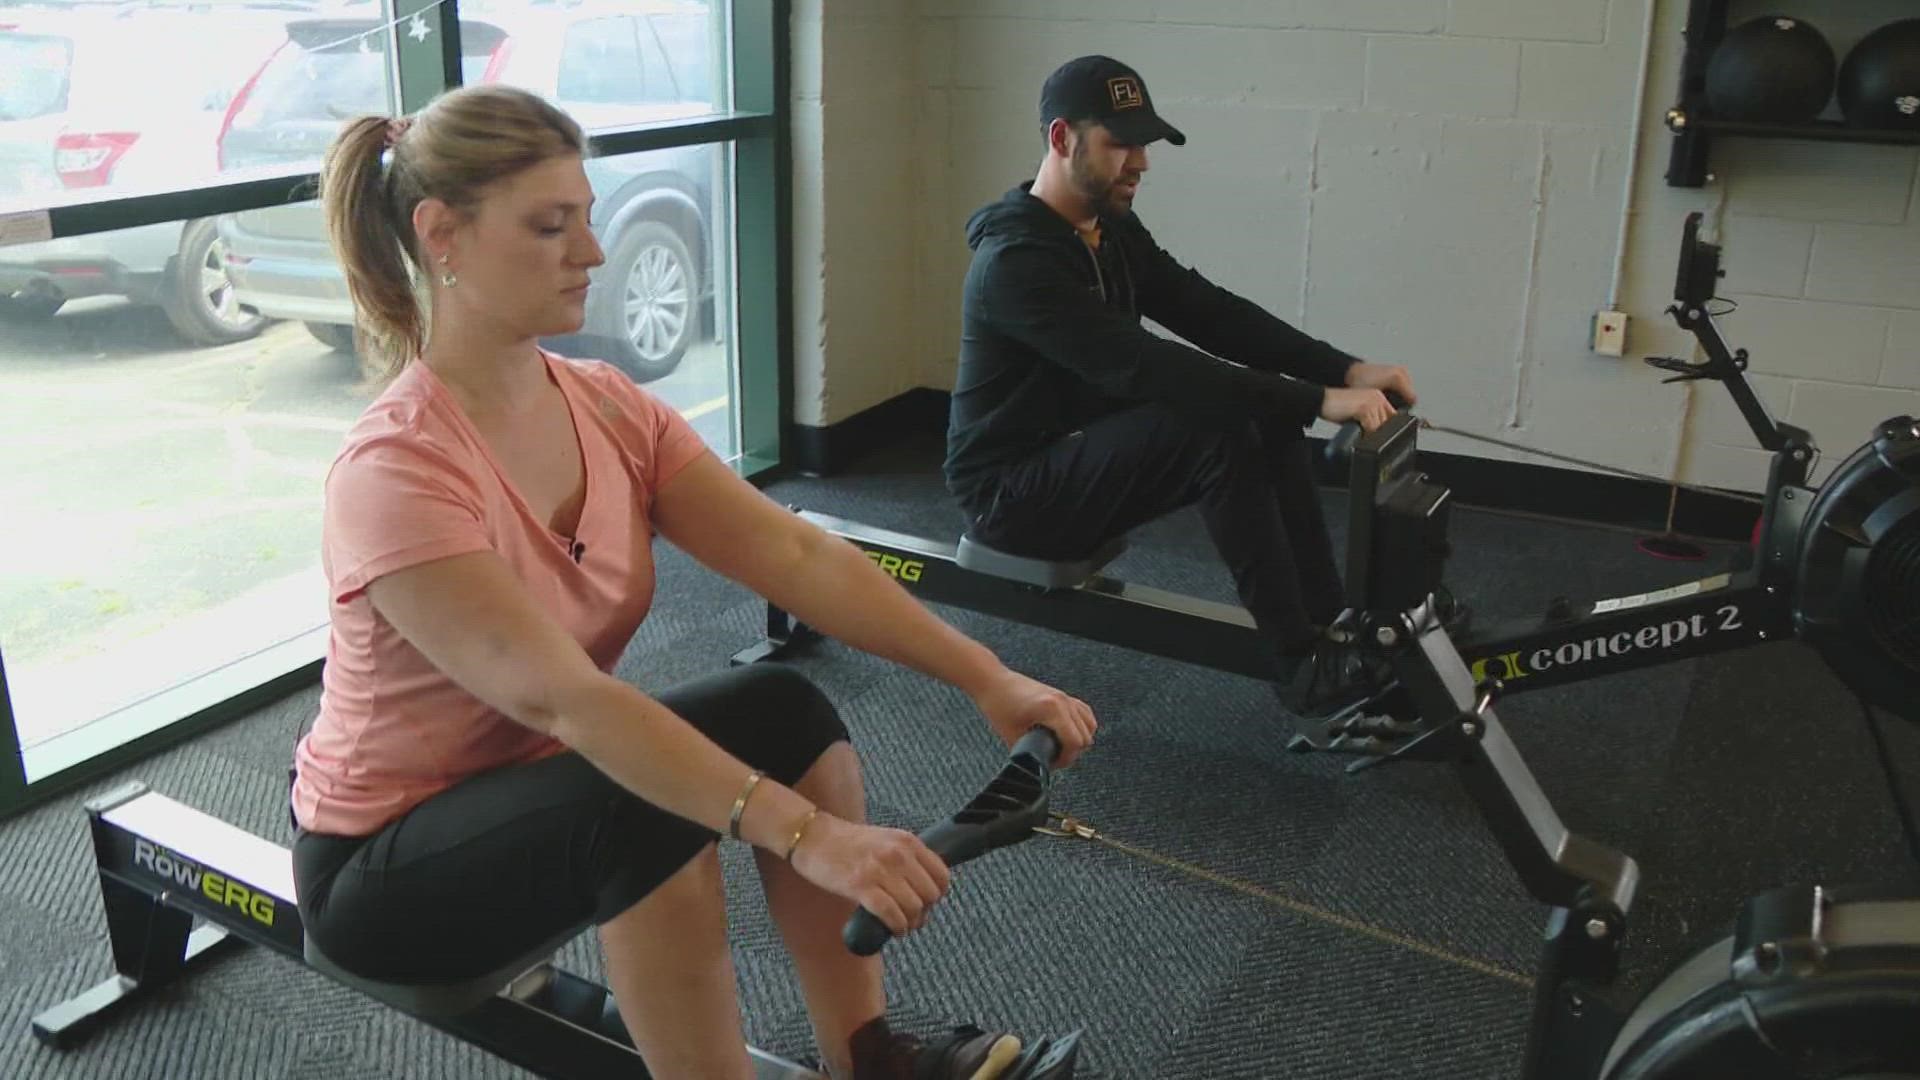 Andrew Blais from The Form Lab shows us how to row correctly.